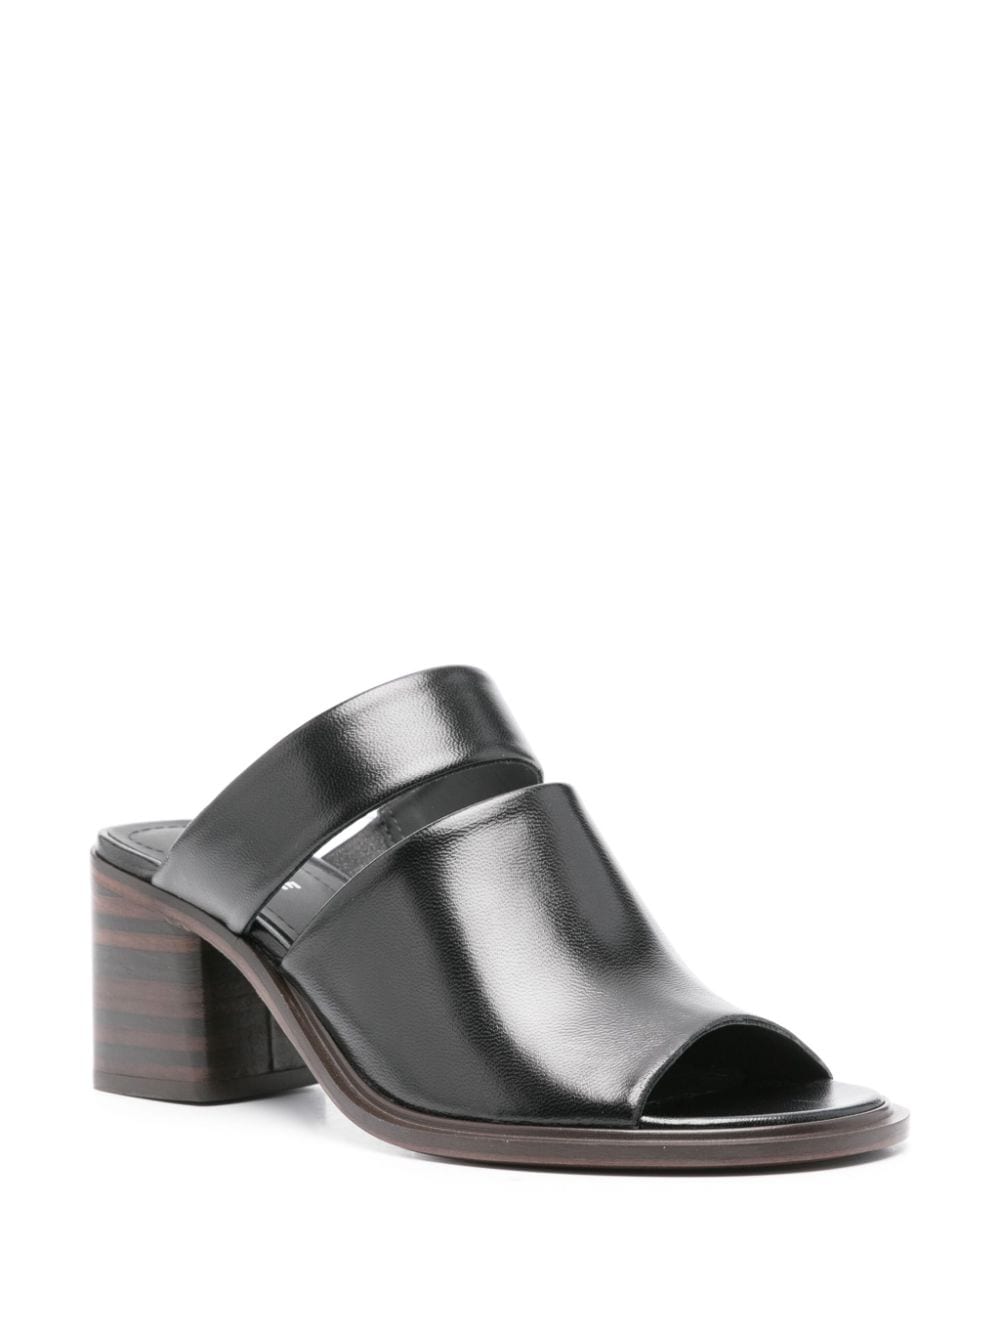 LEMAIRE 55mm leather mules - Zwart